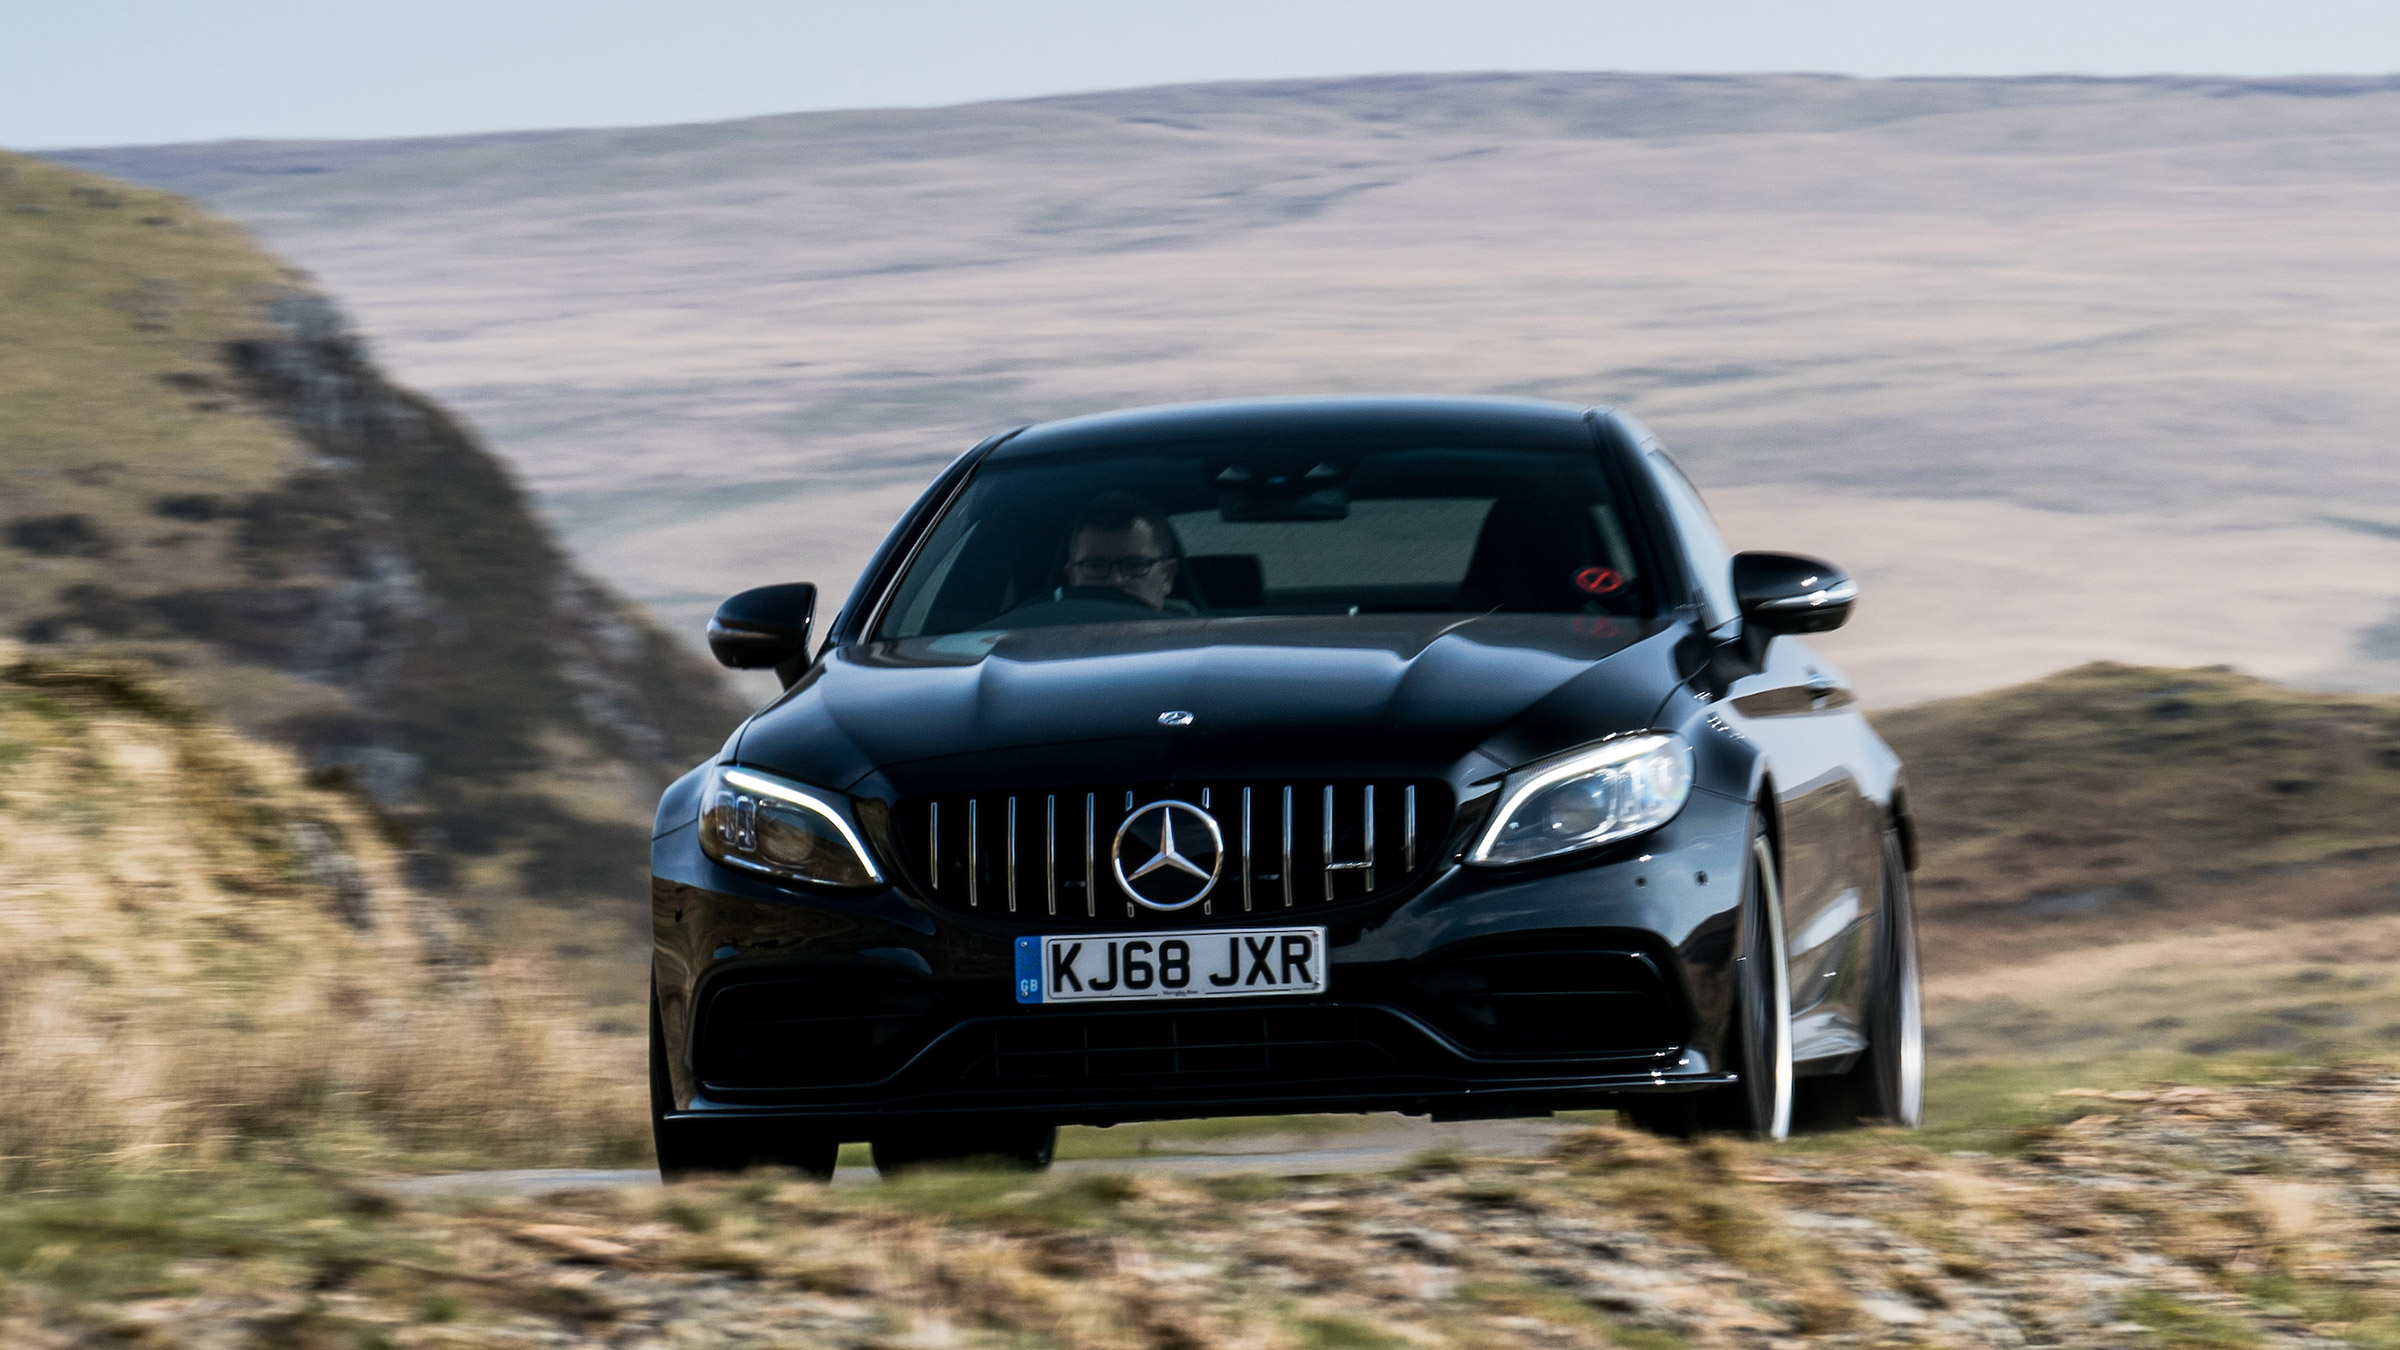 Mercedes-AMG C63 S Coupe 2021 review – AMG's V8 bruiser on borrowed